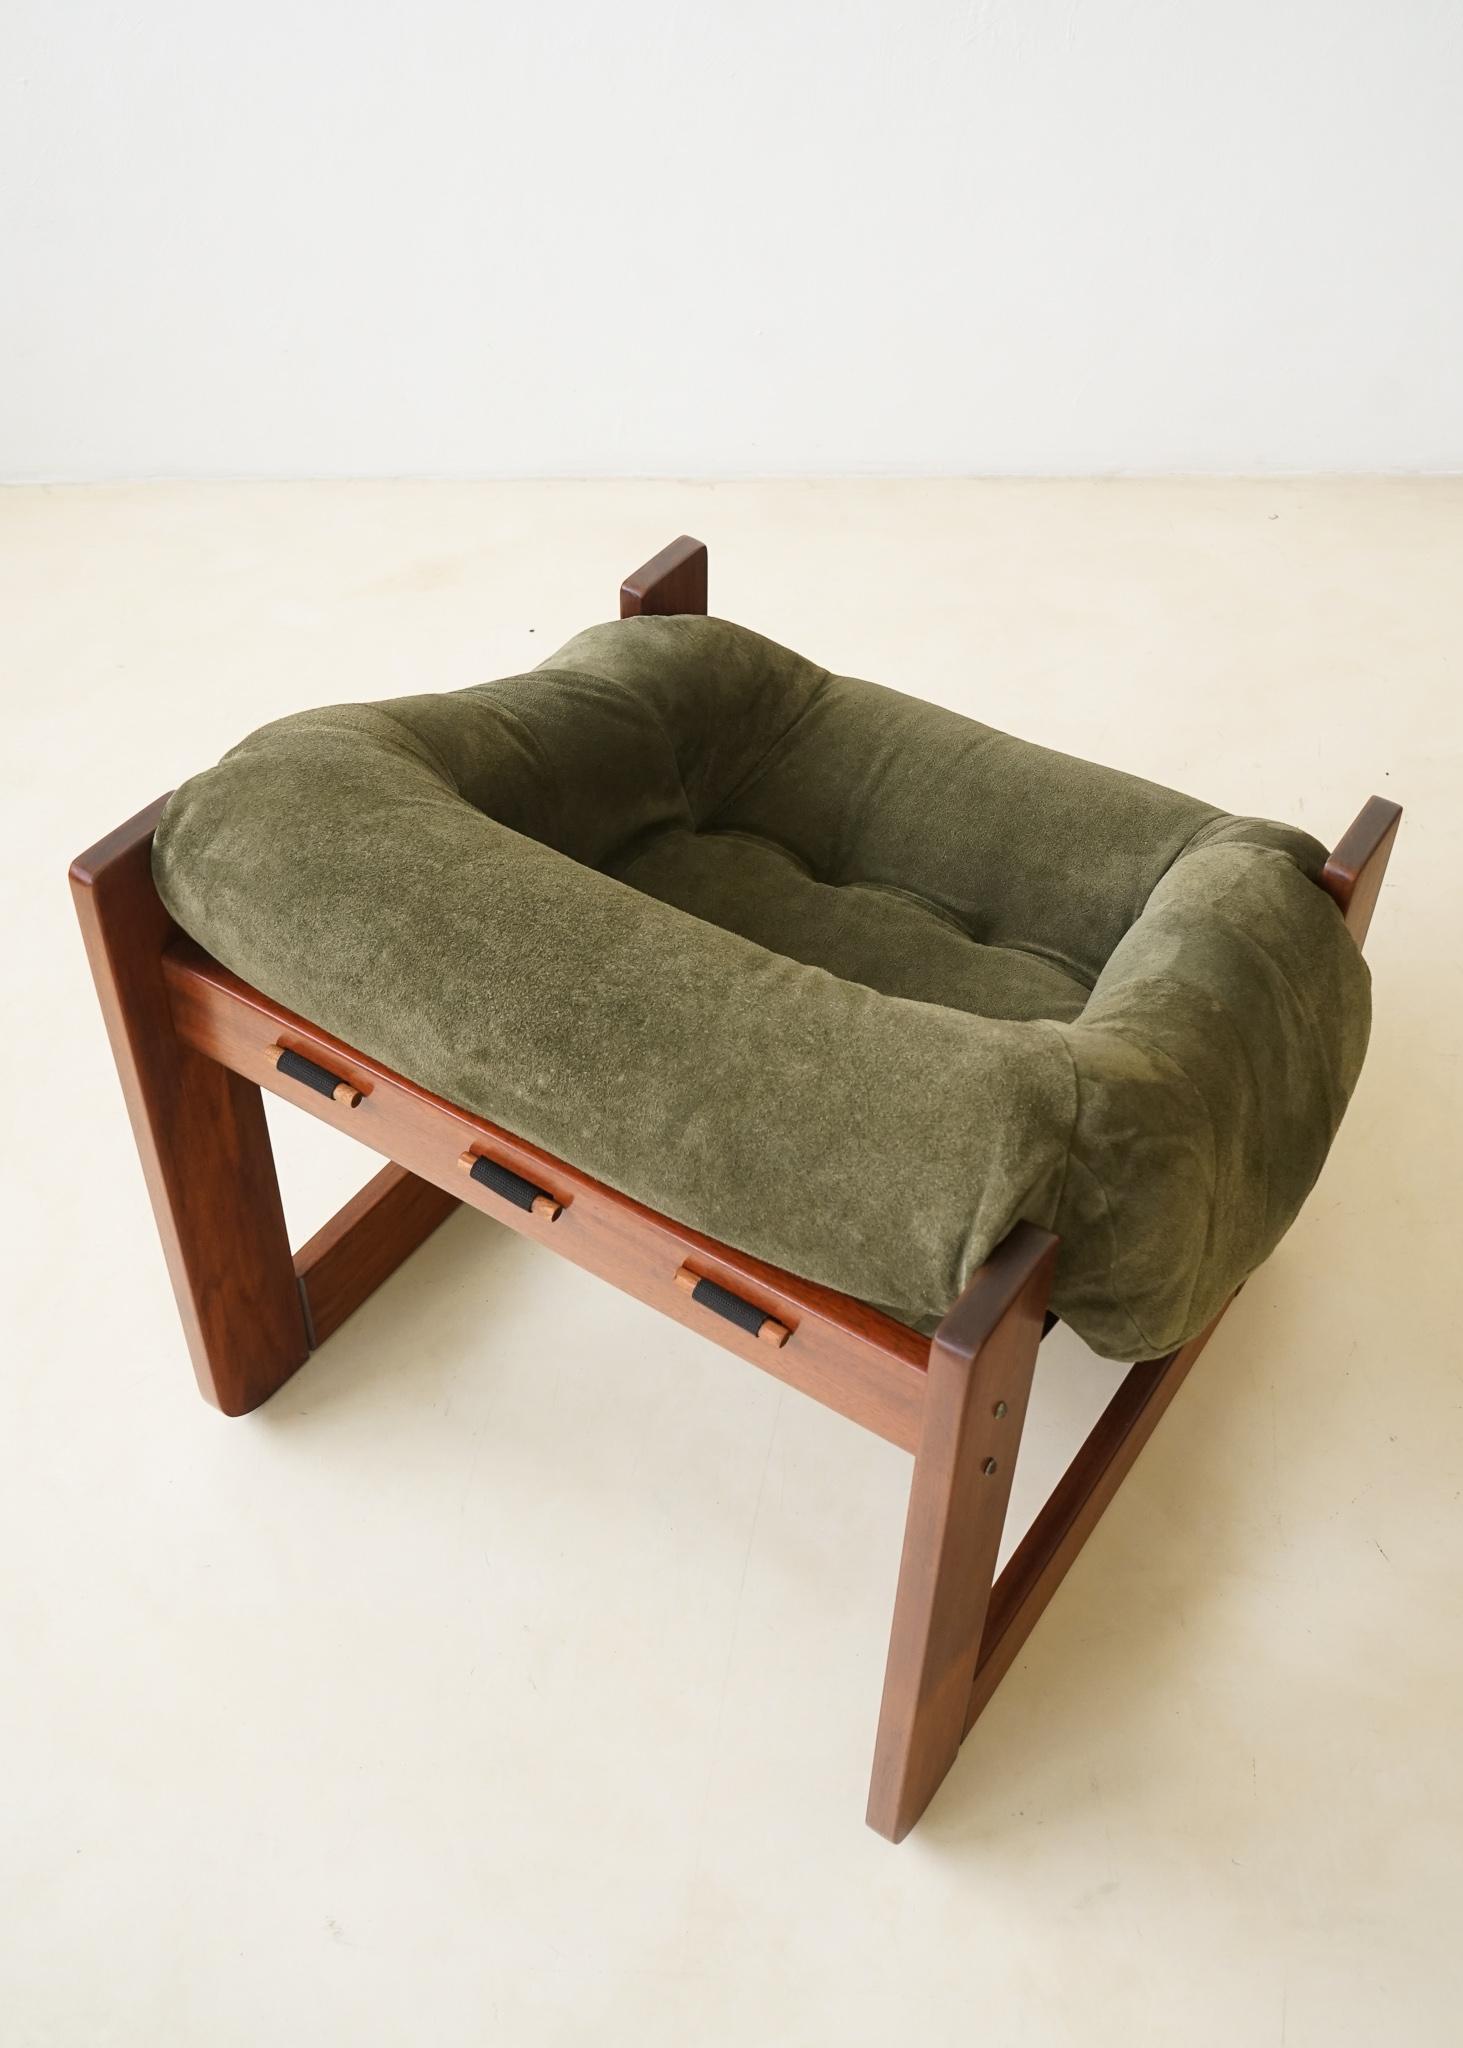 Late 20th Century Single MP-97 Midcentury Lounge Chair by Percival Lafer, 1970s, Brazilian Design